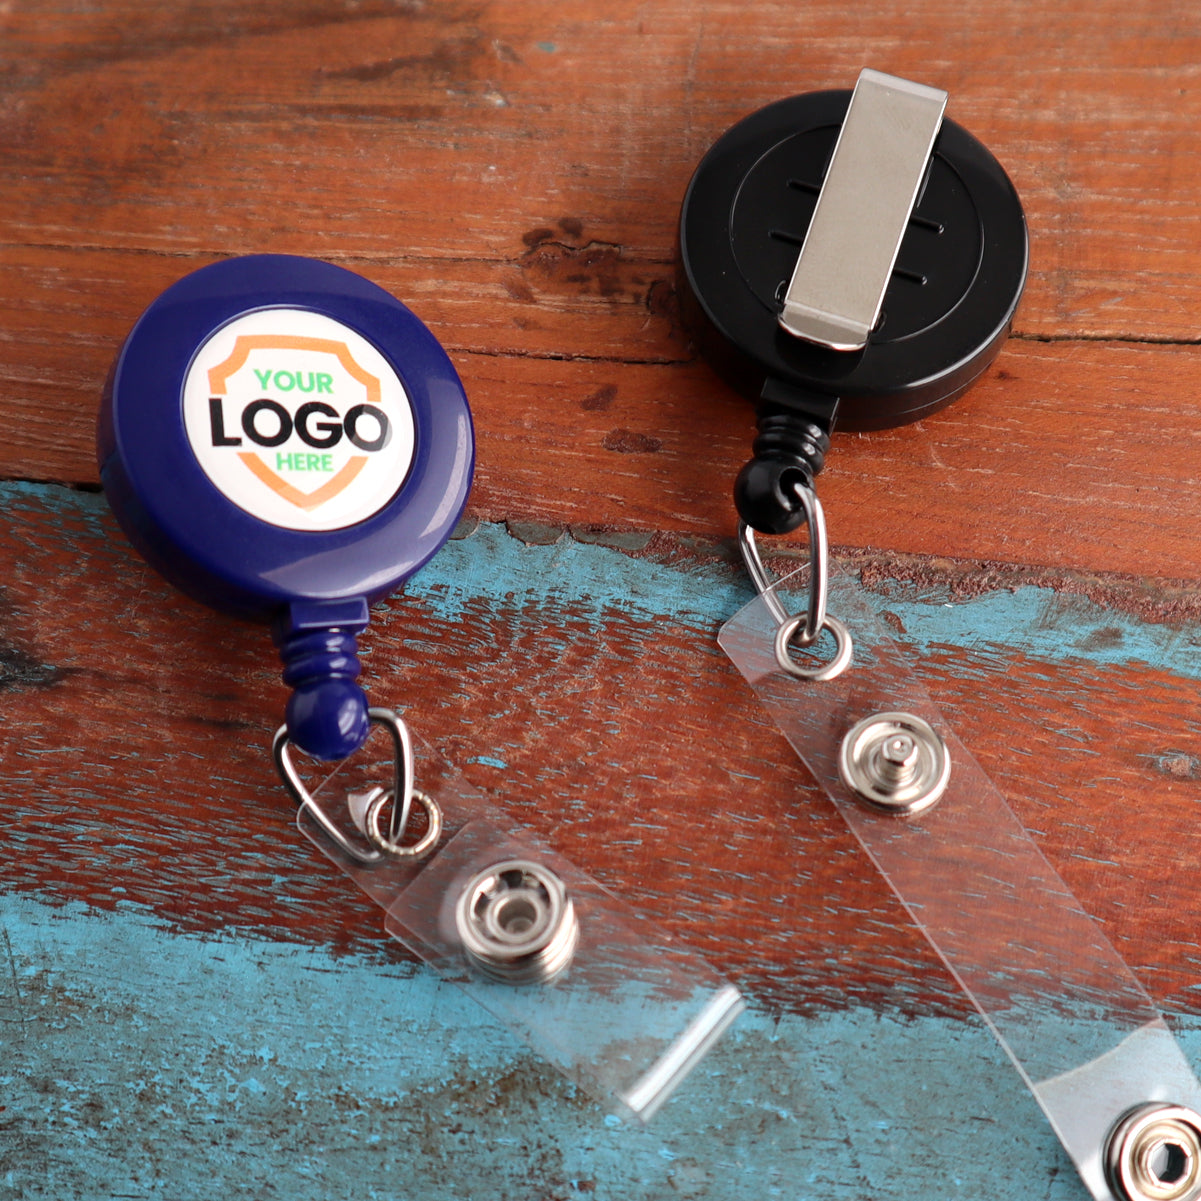 Two retractable badge holders are on a wood surface. The one on the left is Custom Printed Retractable Badge Reels With Belt Clip - Personalize with Your Brand Logo, which is blue with a customizable logo area, perfect for promoting brand awareness with full color graphics. The one on the right is black with a metal clip and clear strap, ideal for custom badge reels.